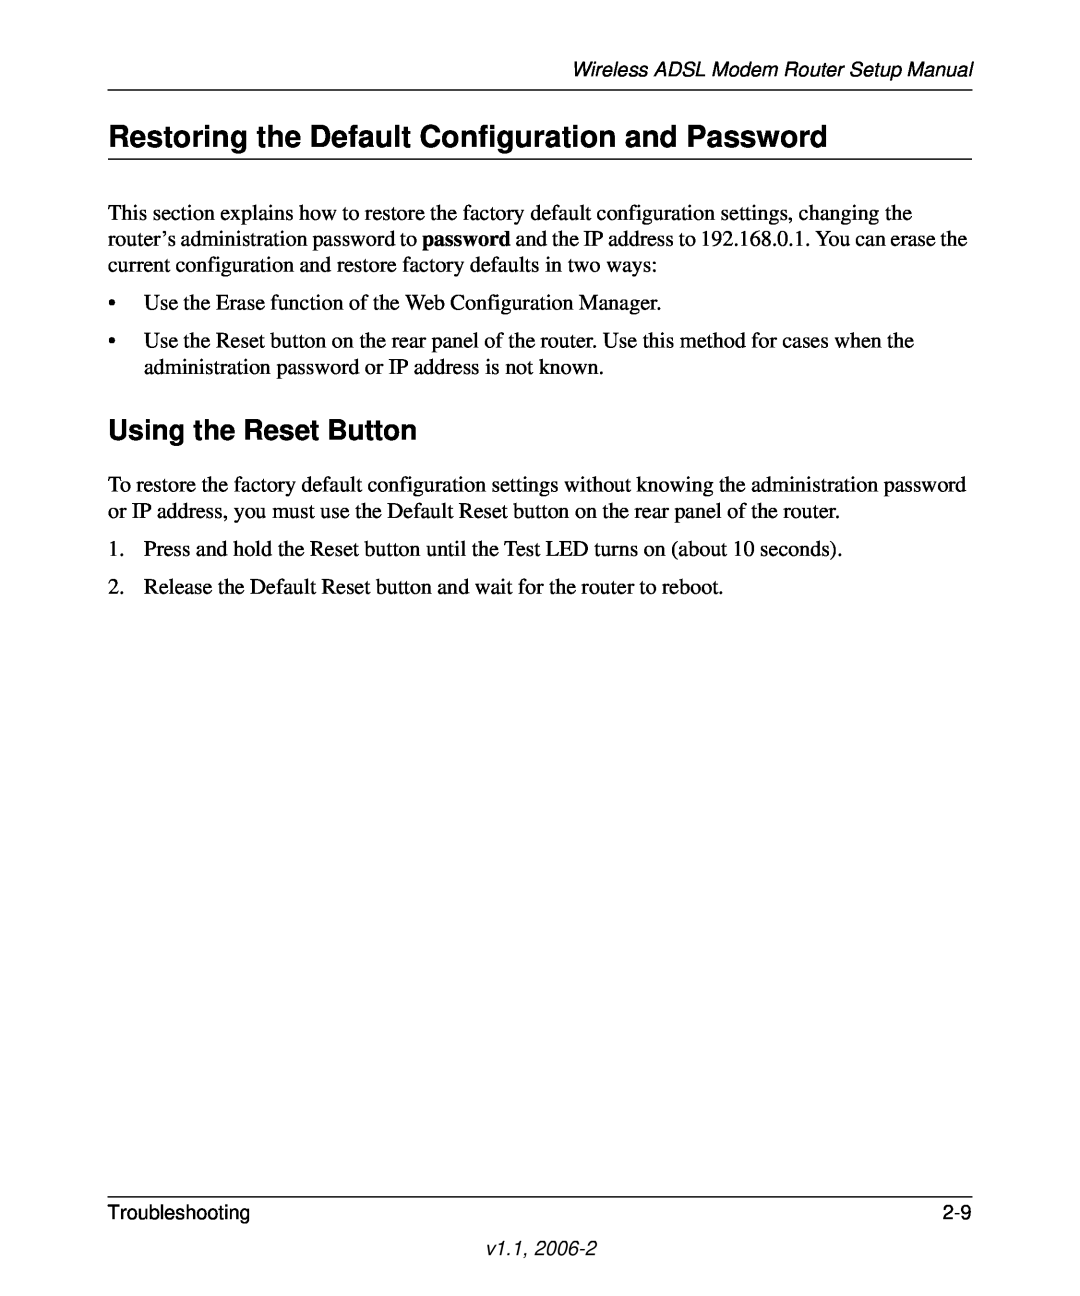 NETGEAR Wireless ADSL Modem Router manual Restoring the Default Configuration and Password, Using the Reset Button 